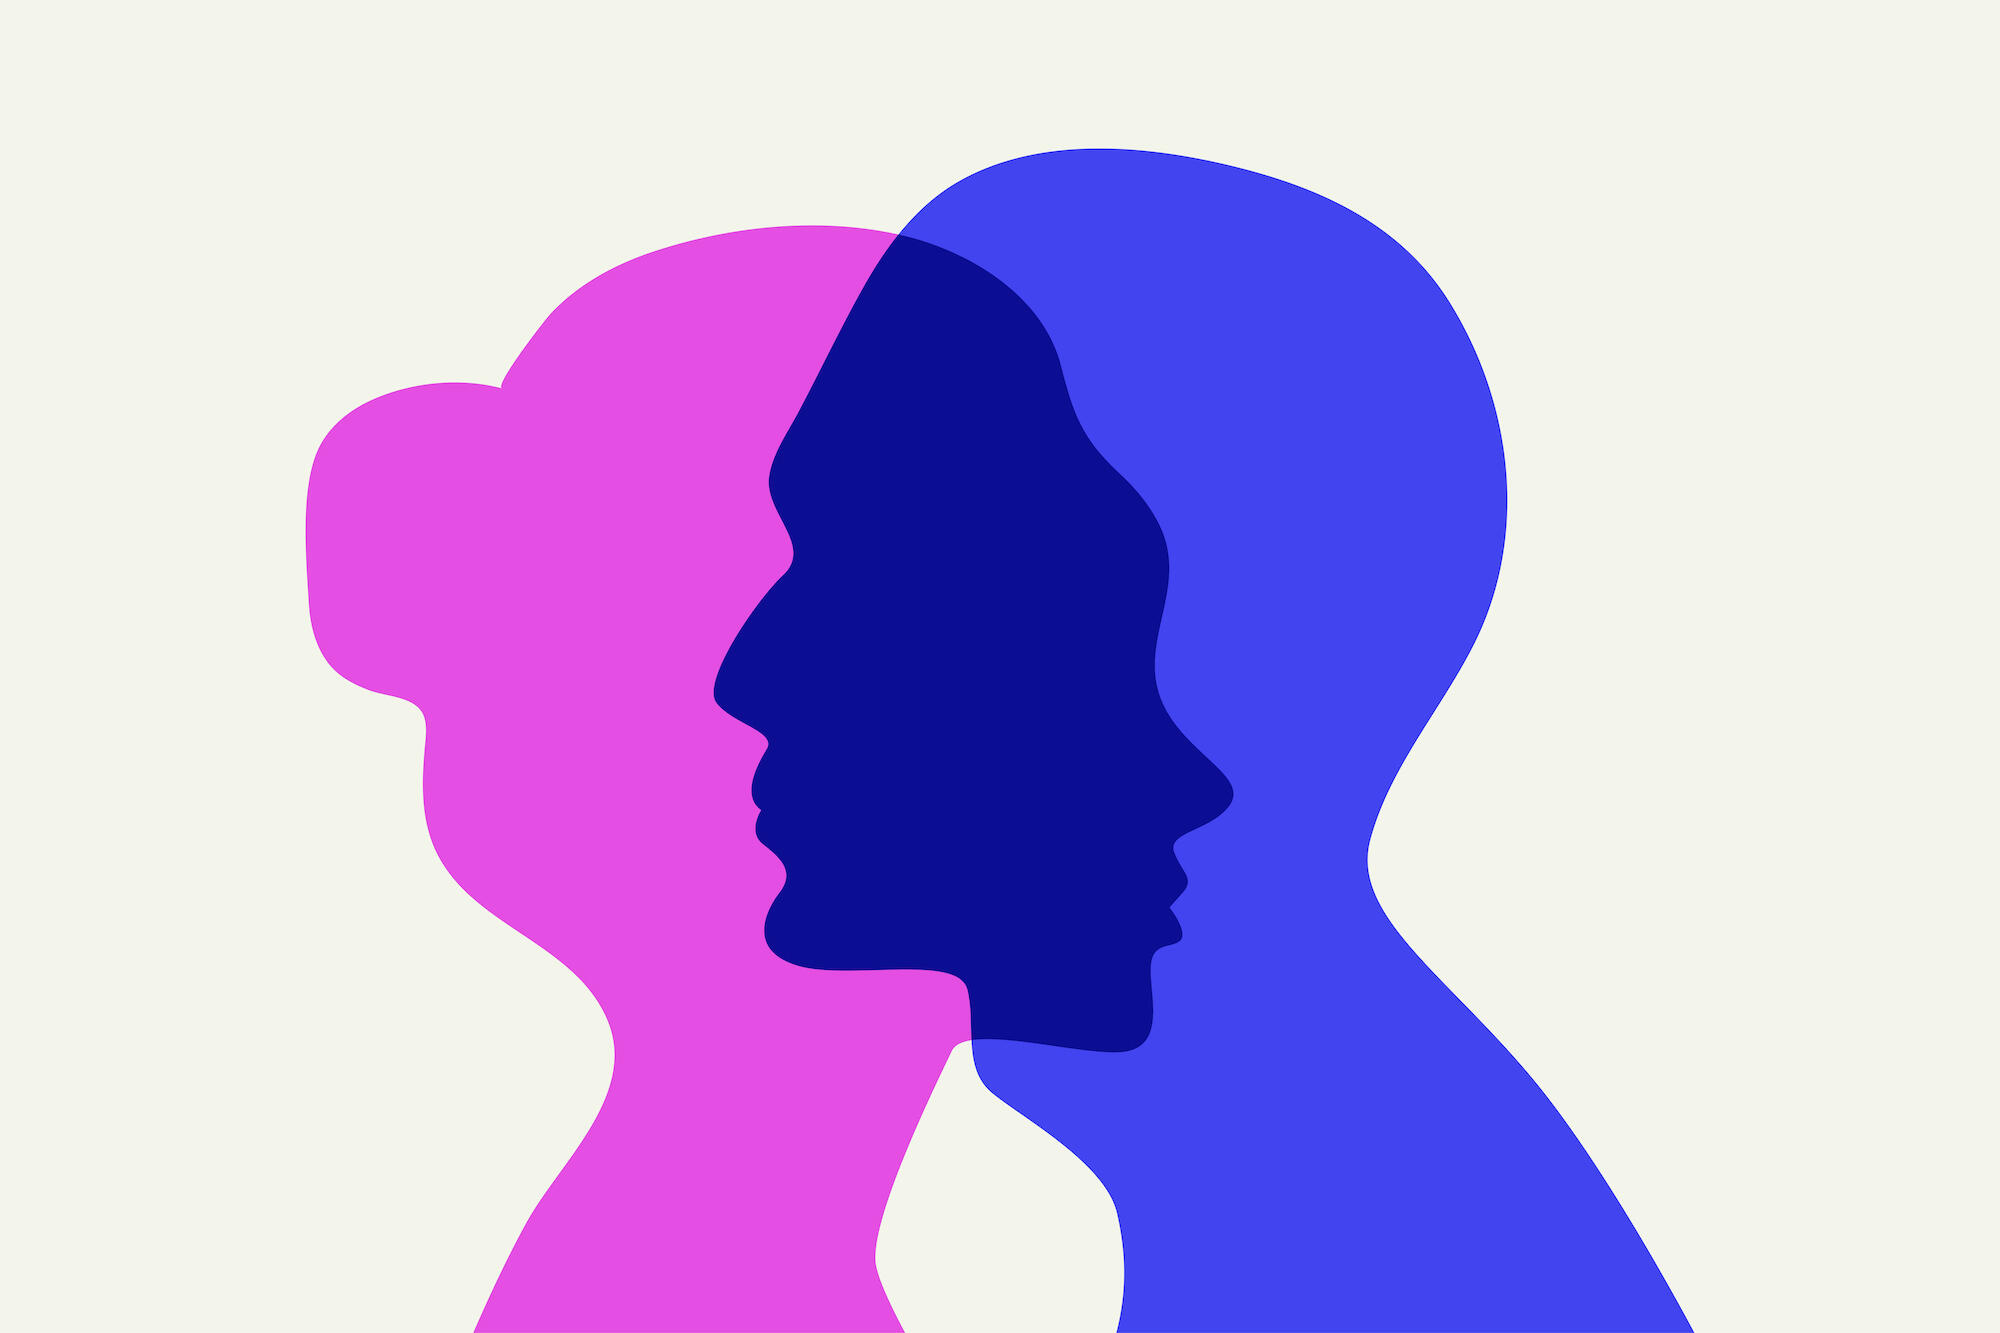 illustration of two overlapping silhouettes of people